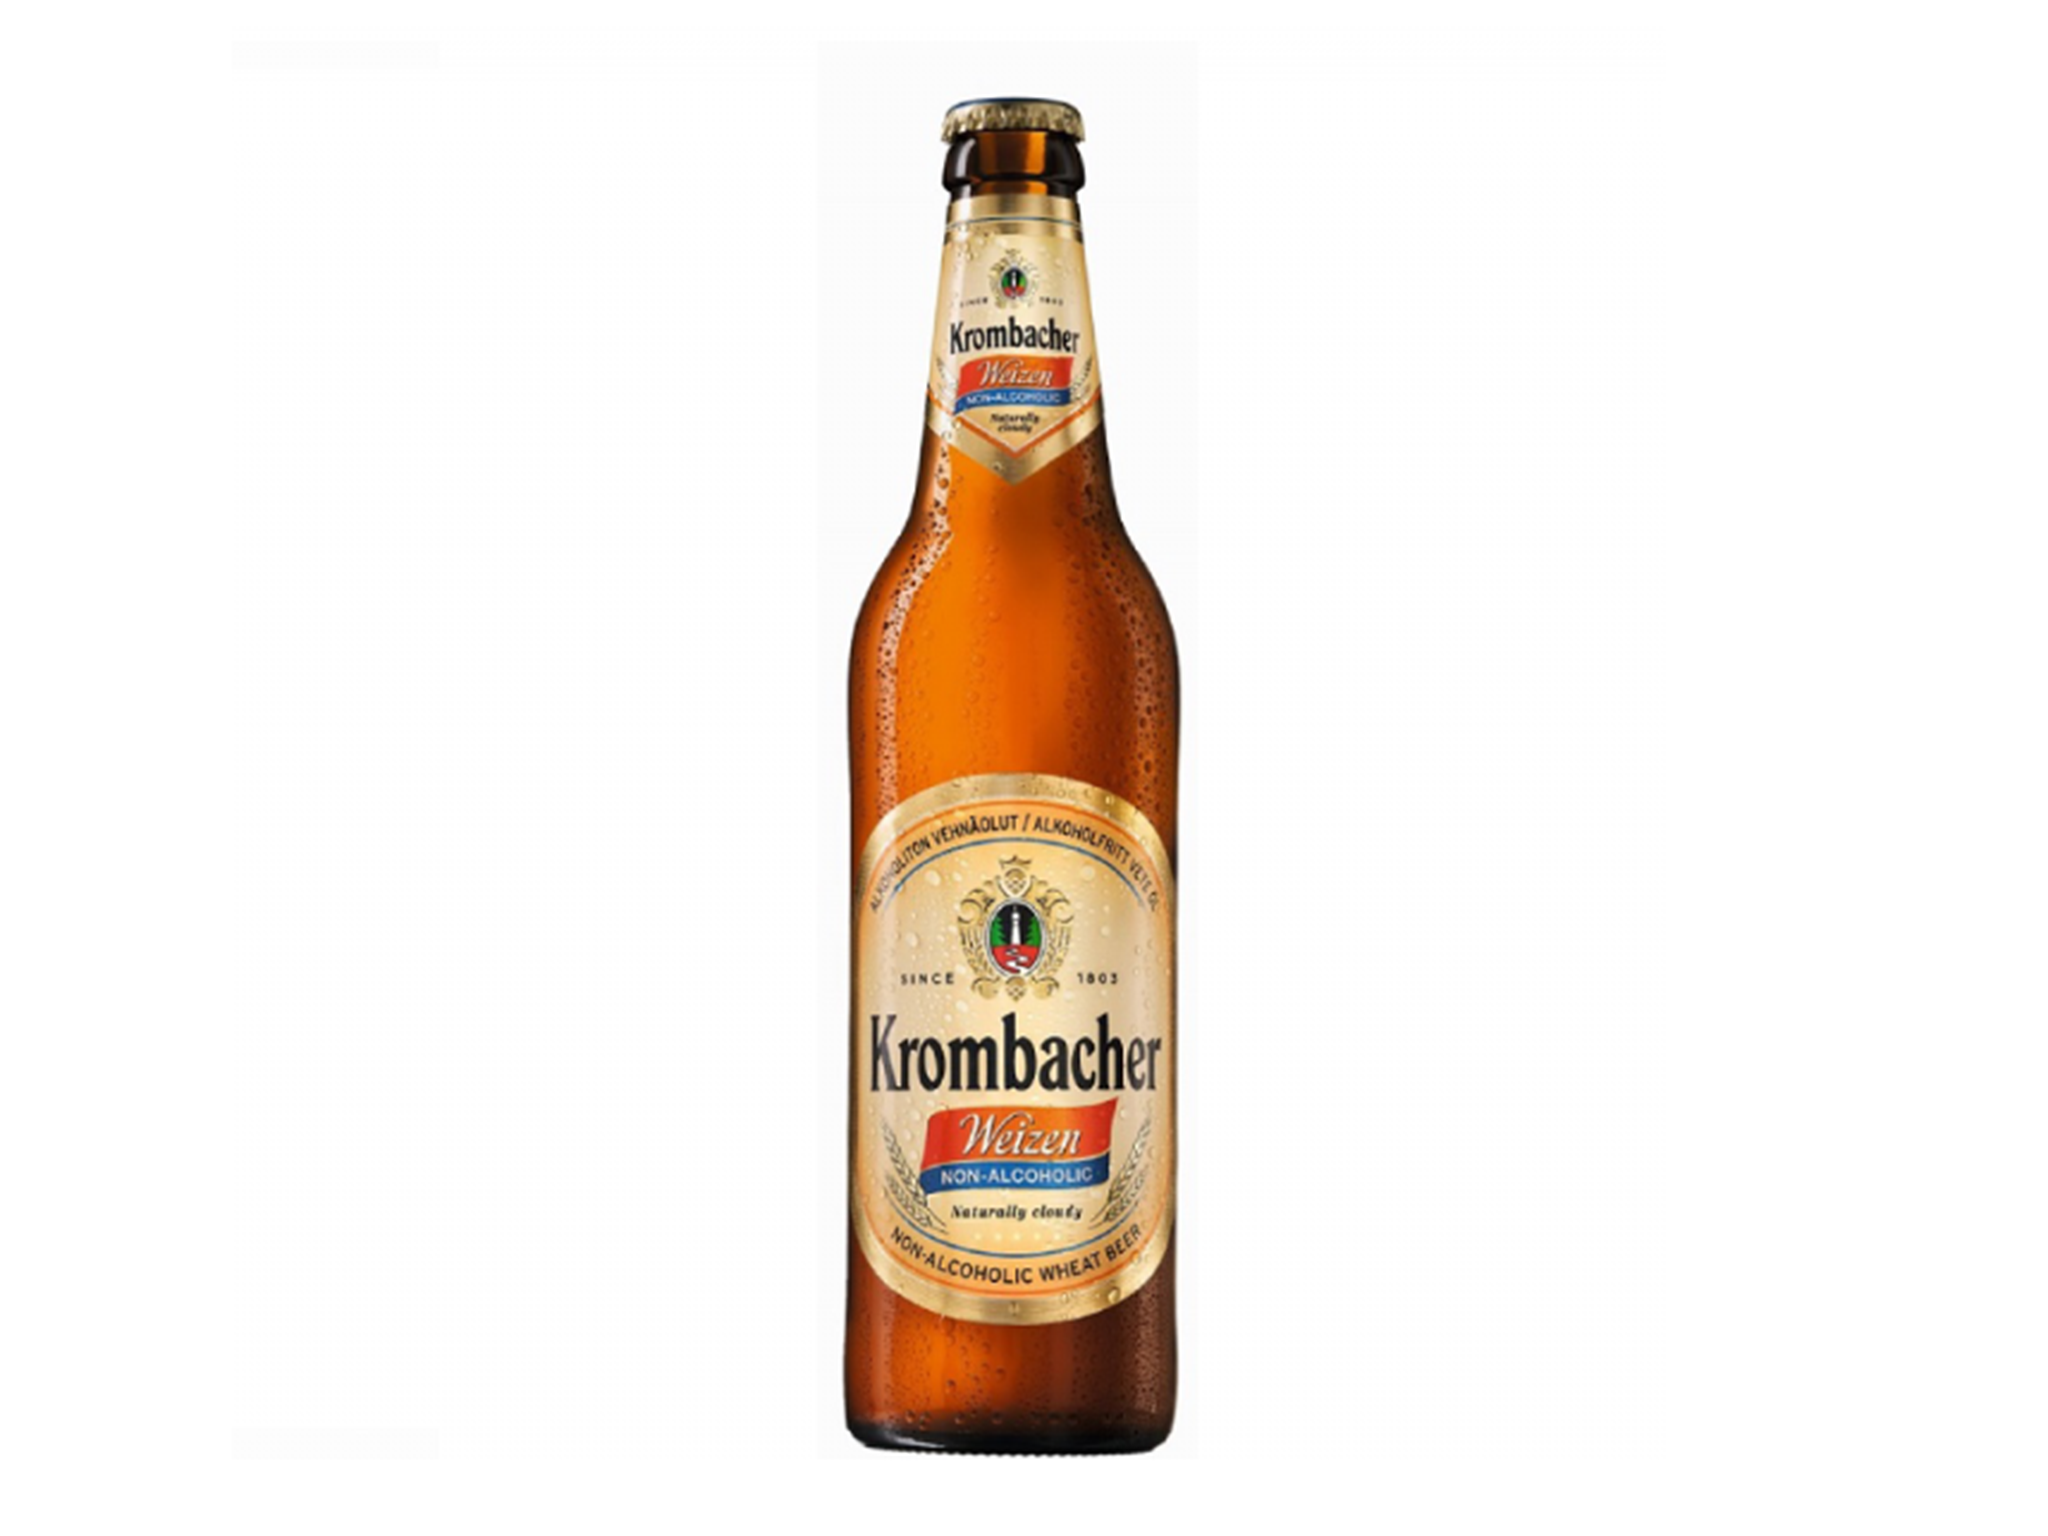 With the same yeasty flavours as its alcoholic counterpart, this beer is brewed in the exact same way as the original